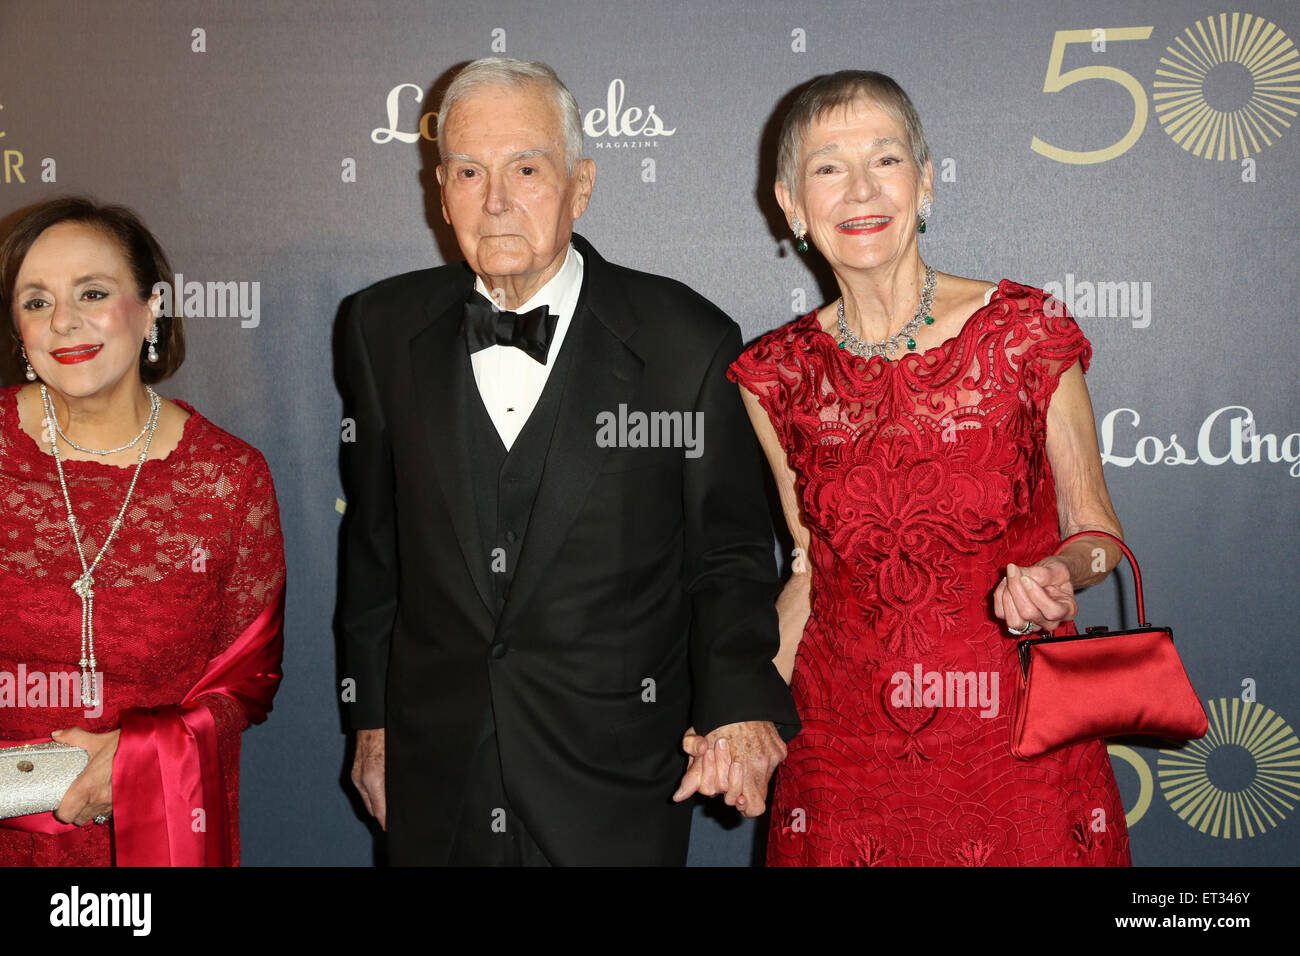 Celebrities attend The Music Center’s 50th Anniversary Spectacular at The Dorothy Chandler Pavilion at the Music Center  Featuring: Guests,Alyce Williamson Where: Los Angeles, California, United States When: 06 Dec 2014 Credit: Brian To/WENN.com Stock Photo